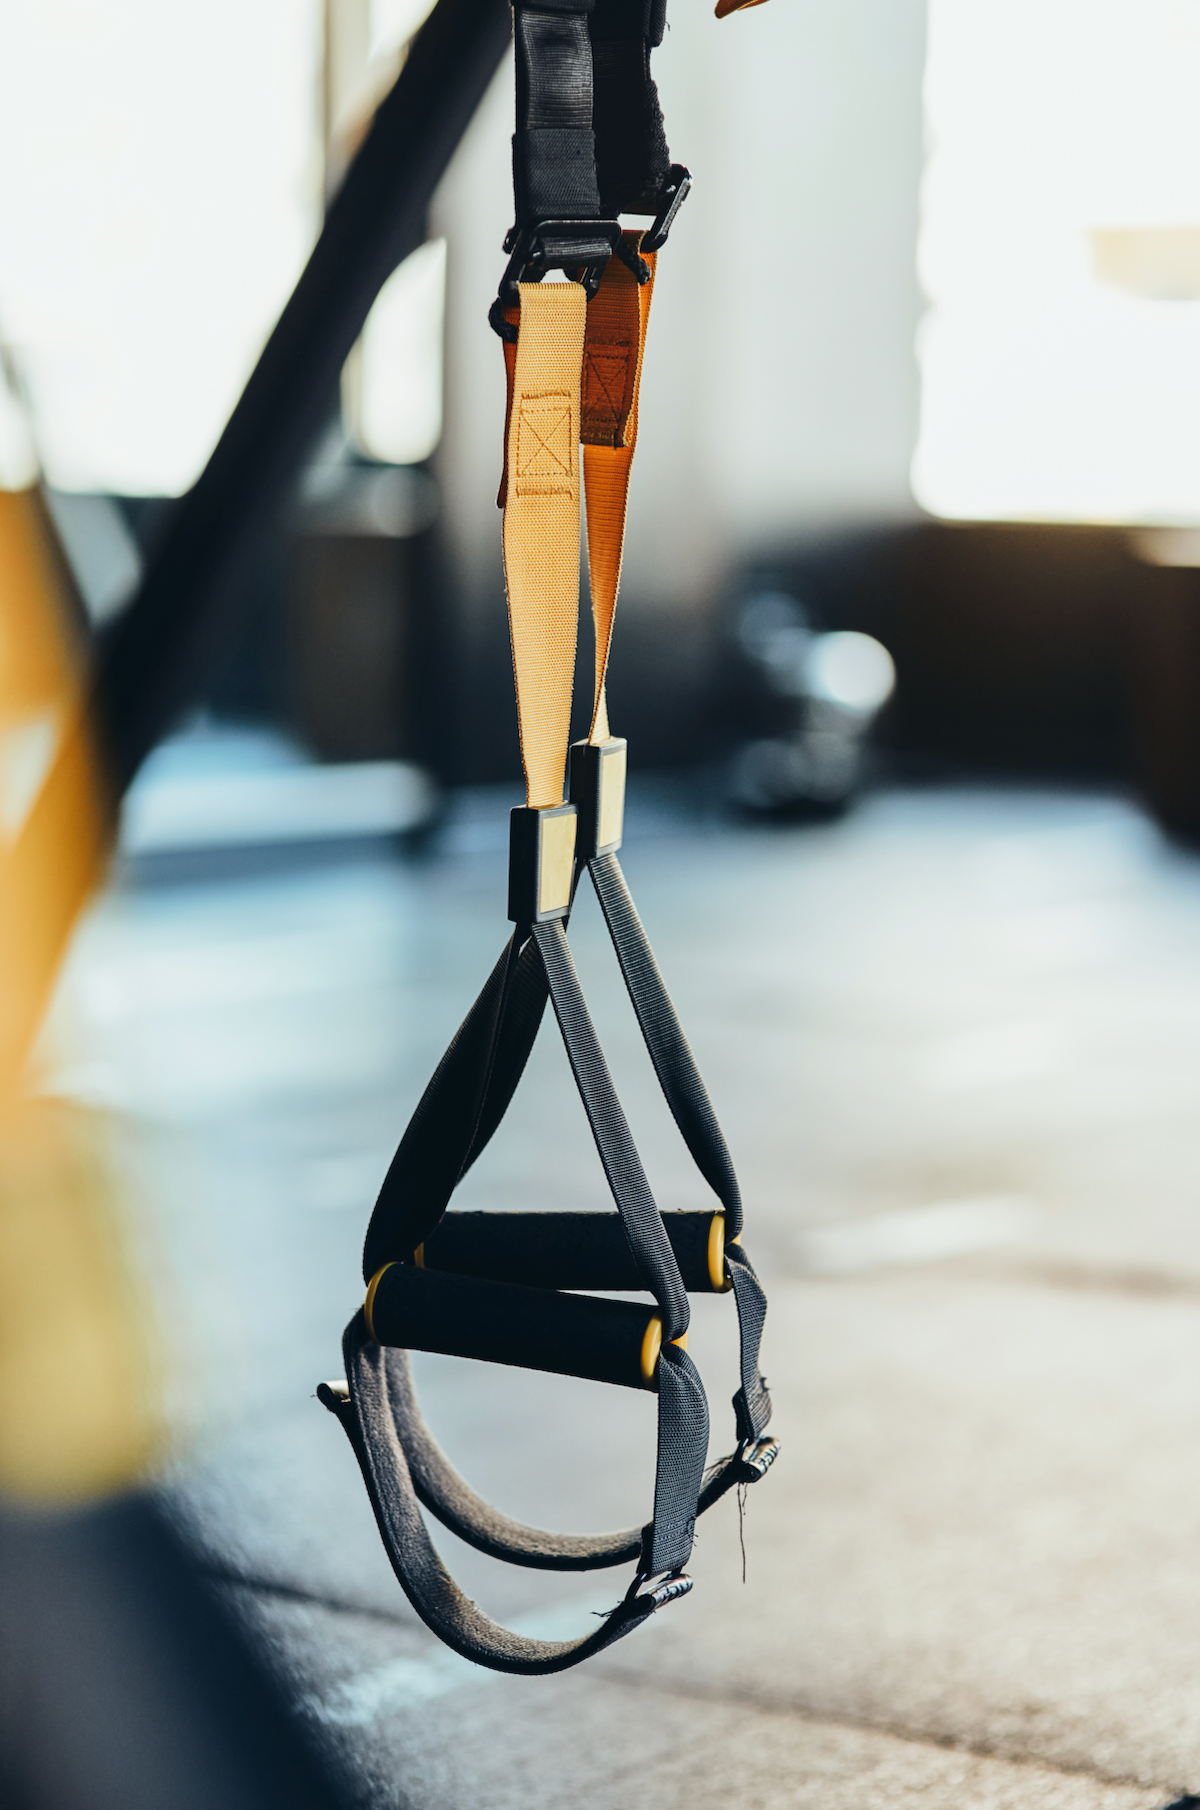 TRX Straps, Protein Bars & More: Inside One Woman's Fitness Journey